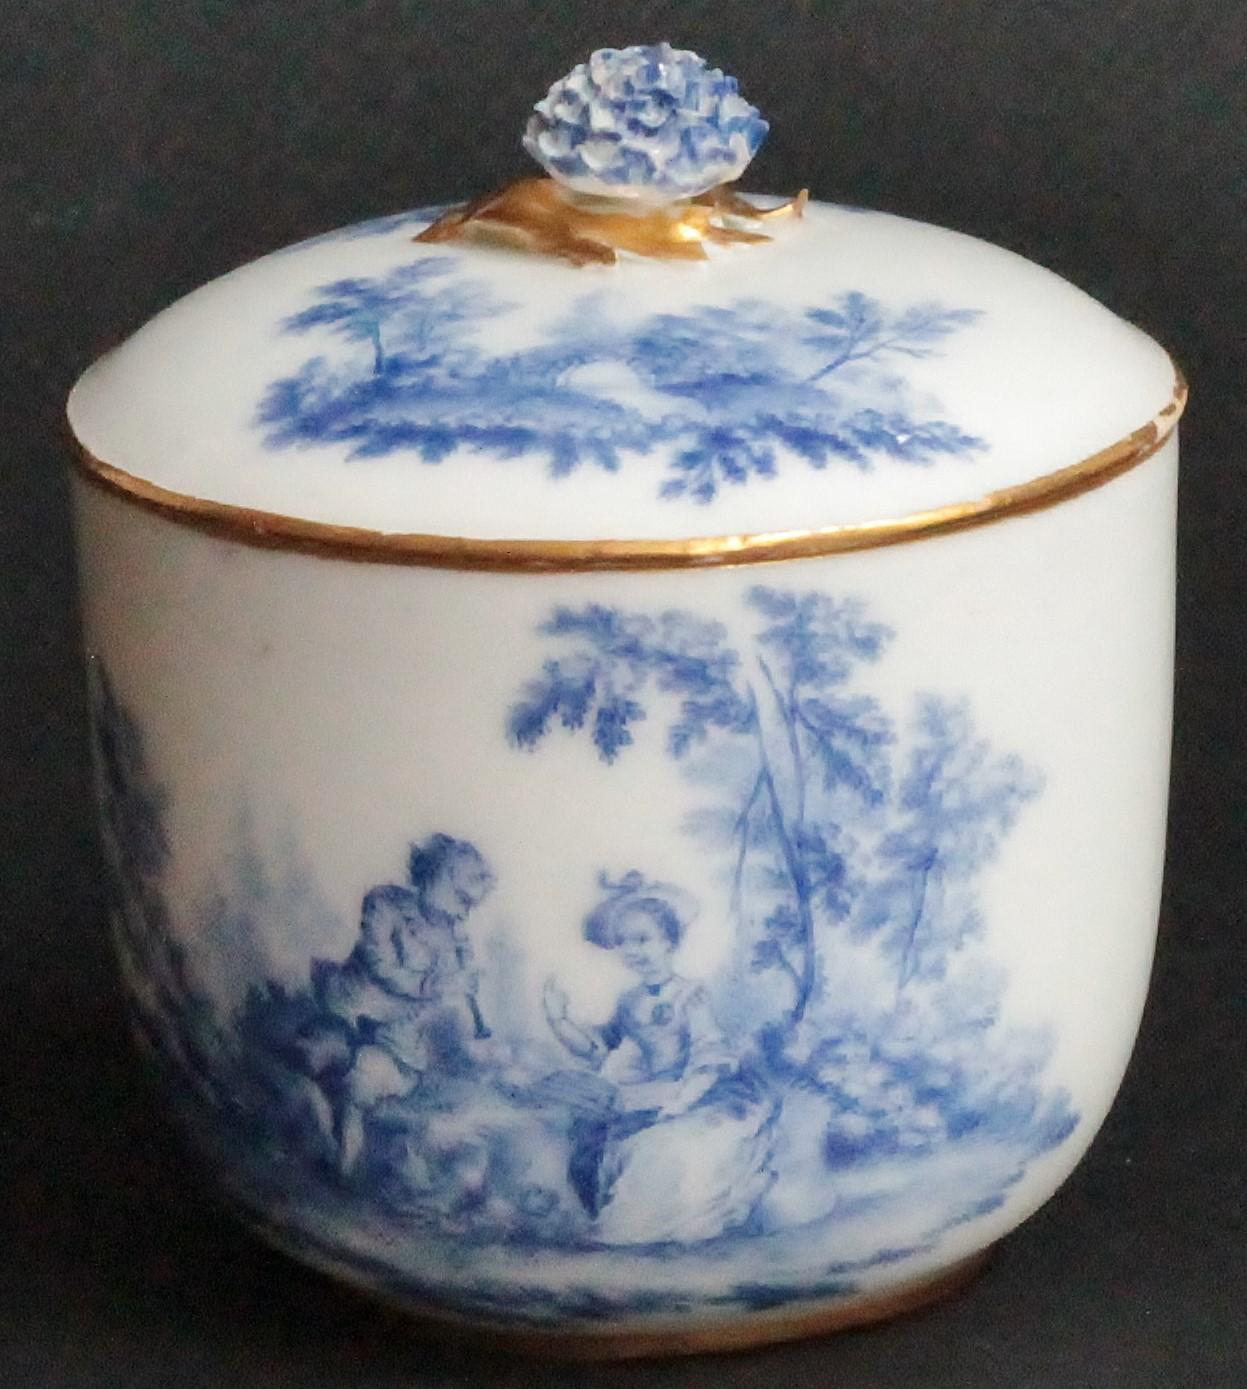 A Vincennes sugar bowl and cover, circa 1752.
Pot à sucre ‘Calabre’ of the first size, painted with blue shades vignettes of couples seated in landscapes, the cover similarly decorated and applied with a flower finial, gilt borders to the